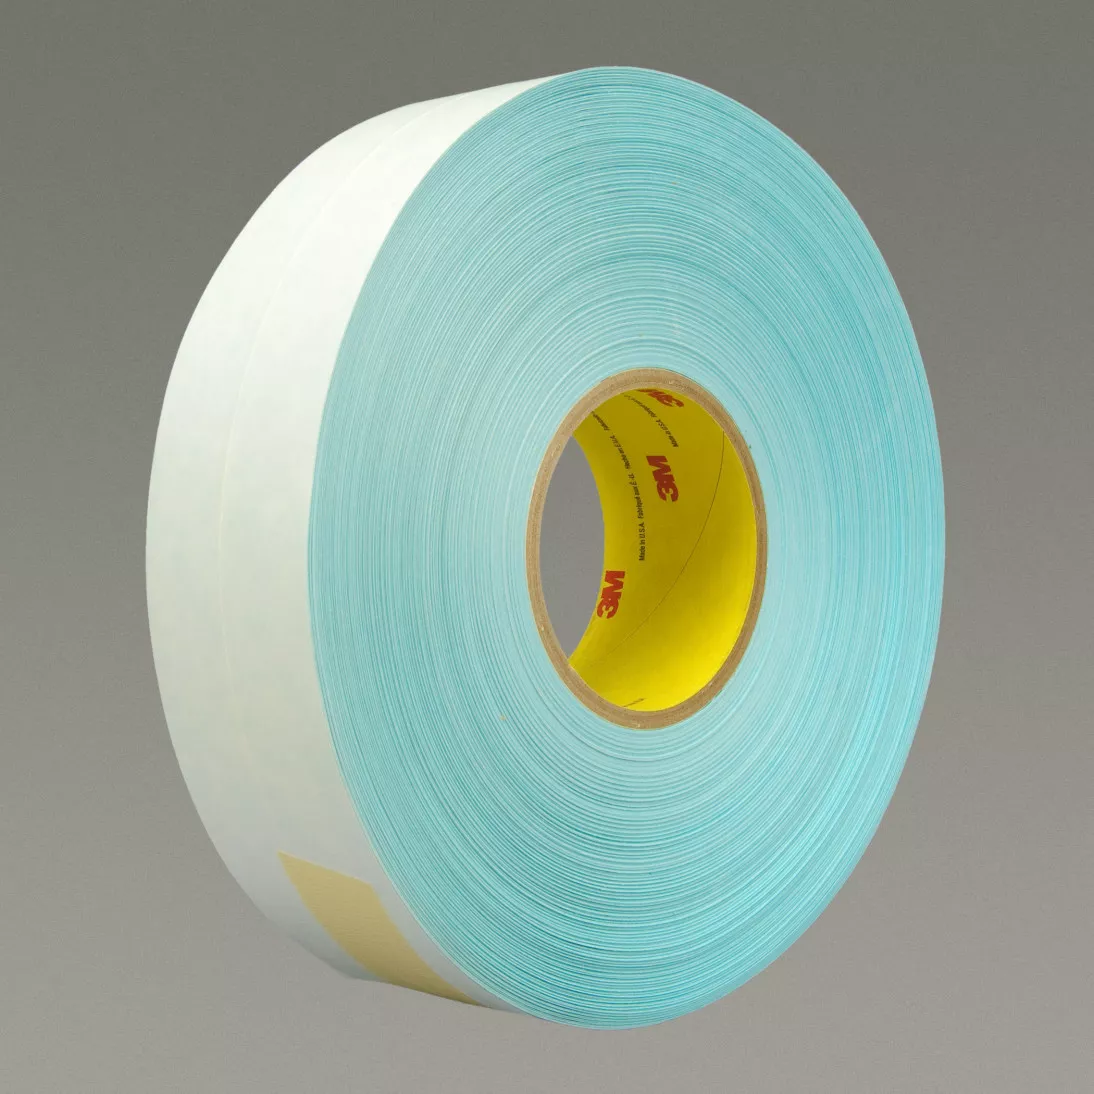 3M™ Printable Repulpable Single Coated Splicing Tape 9103, Blue, 36 mm x
55 m, 4.1 mil, 24 rolls per case